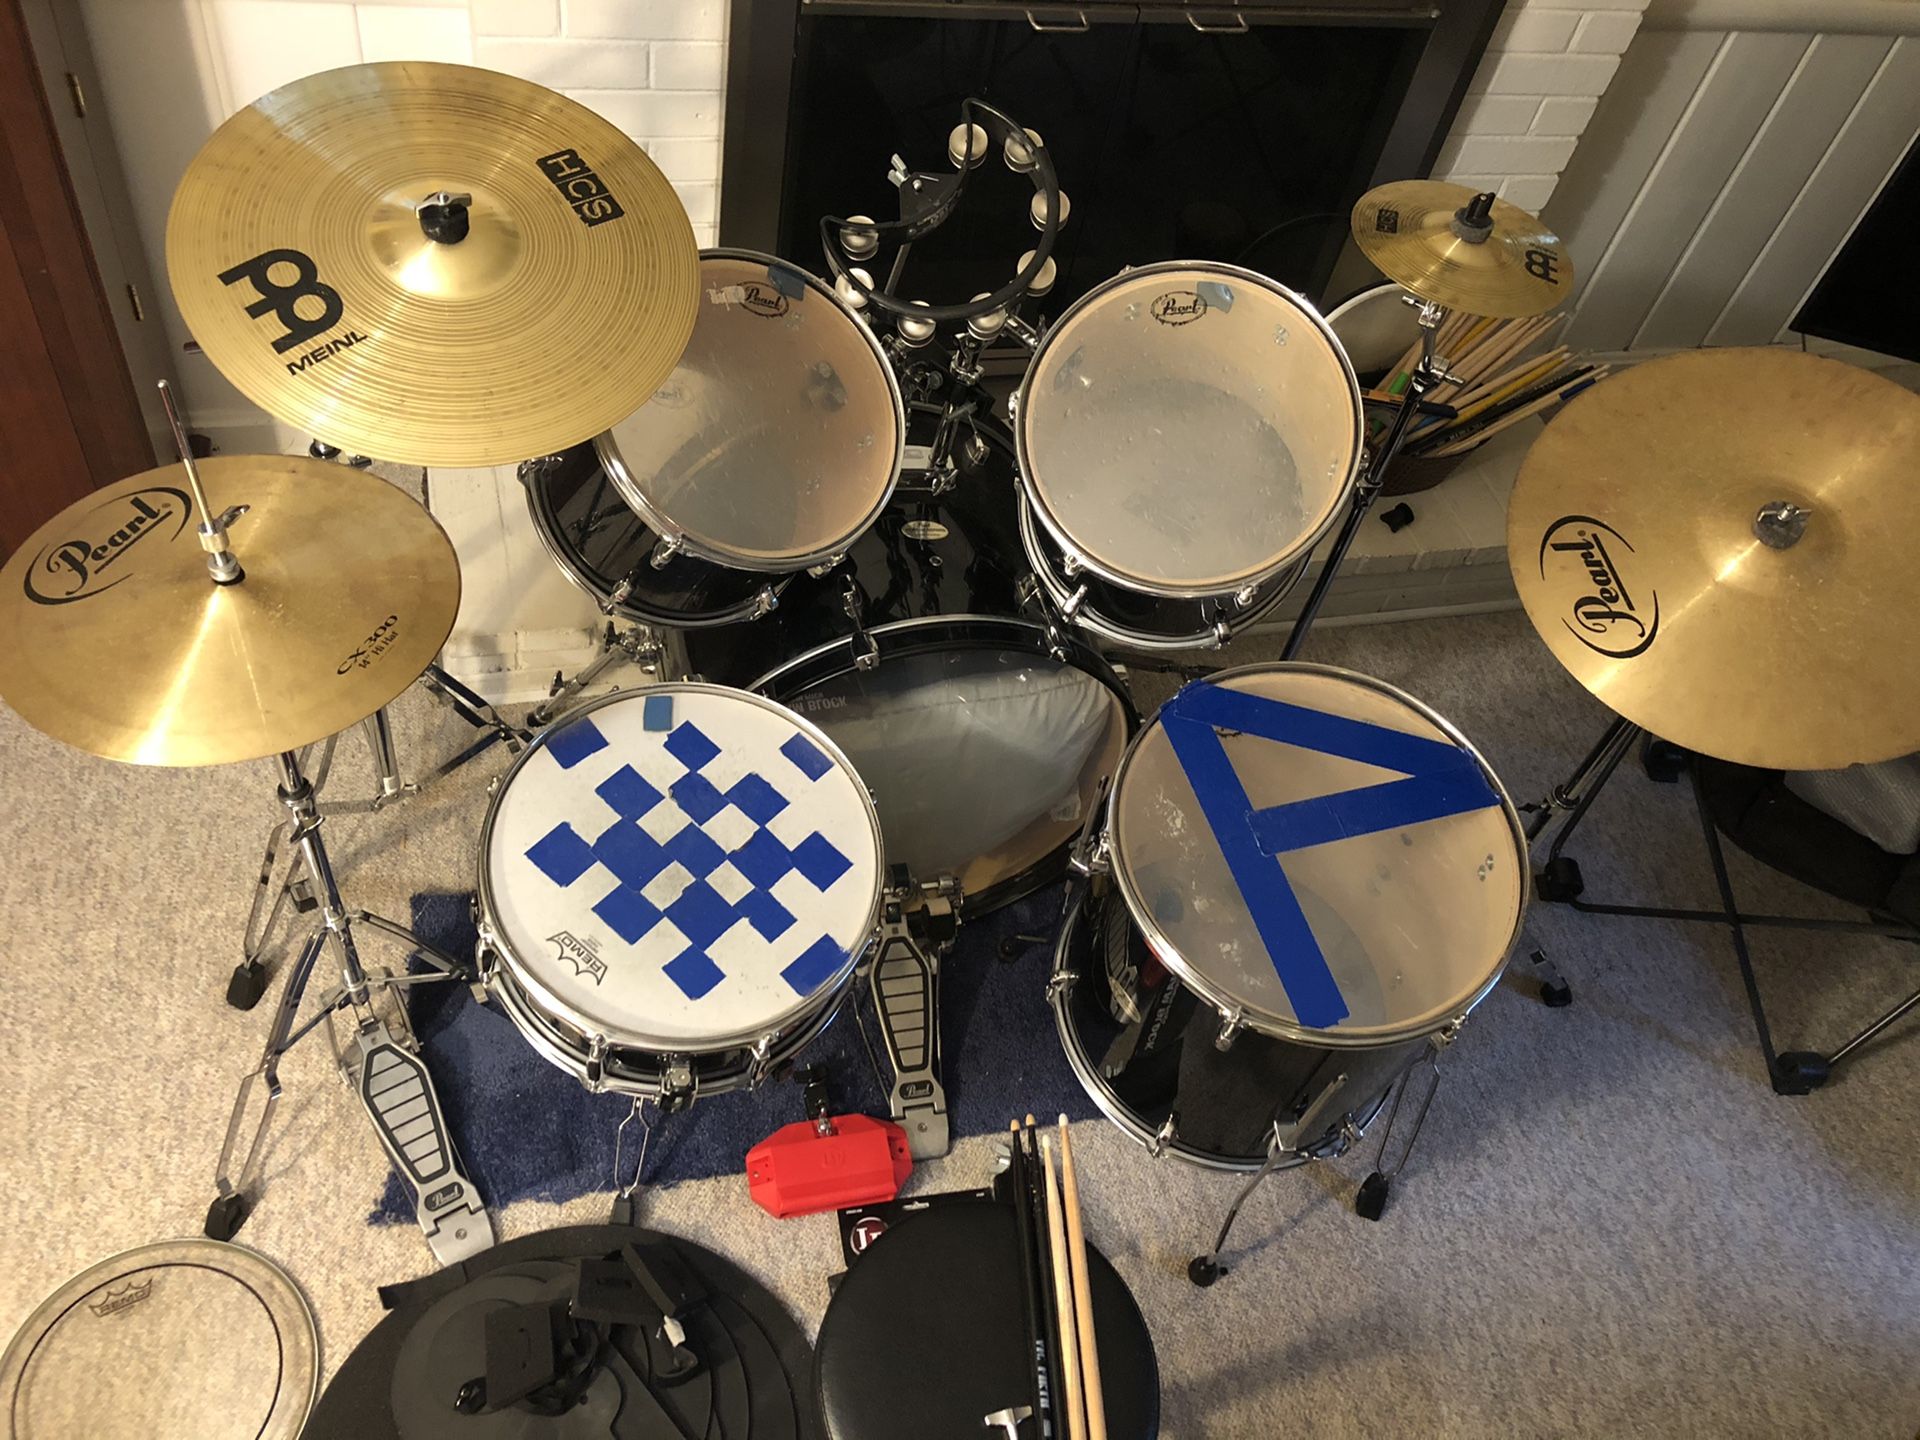 Drum set for sale, everything you need, 5 piece, cymbals, stands, hardware, extra drums